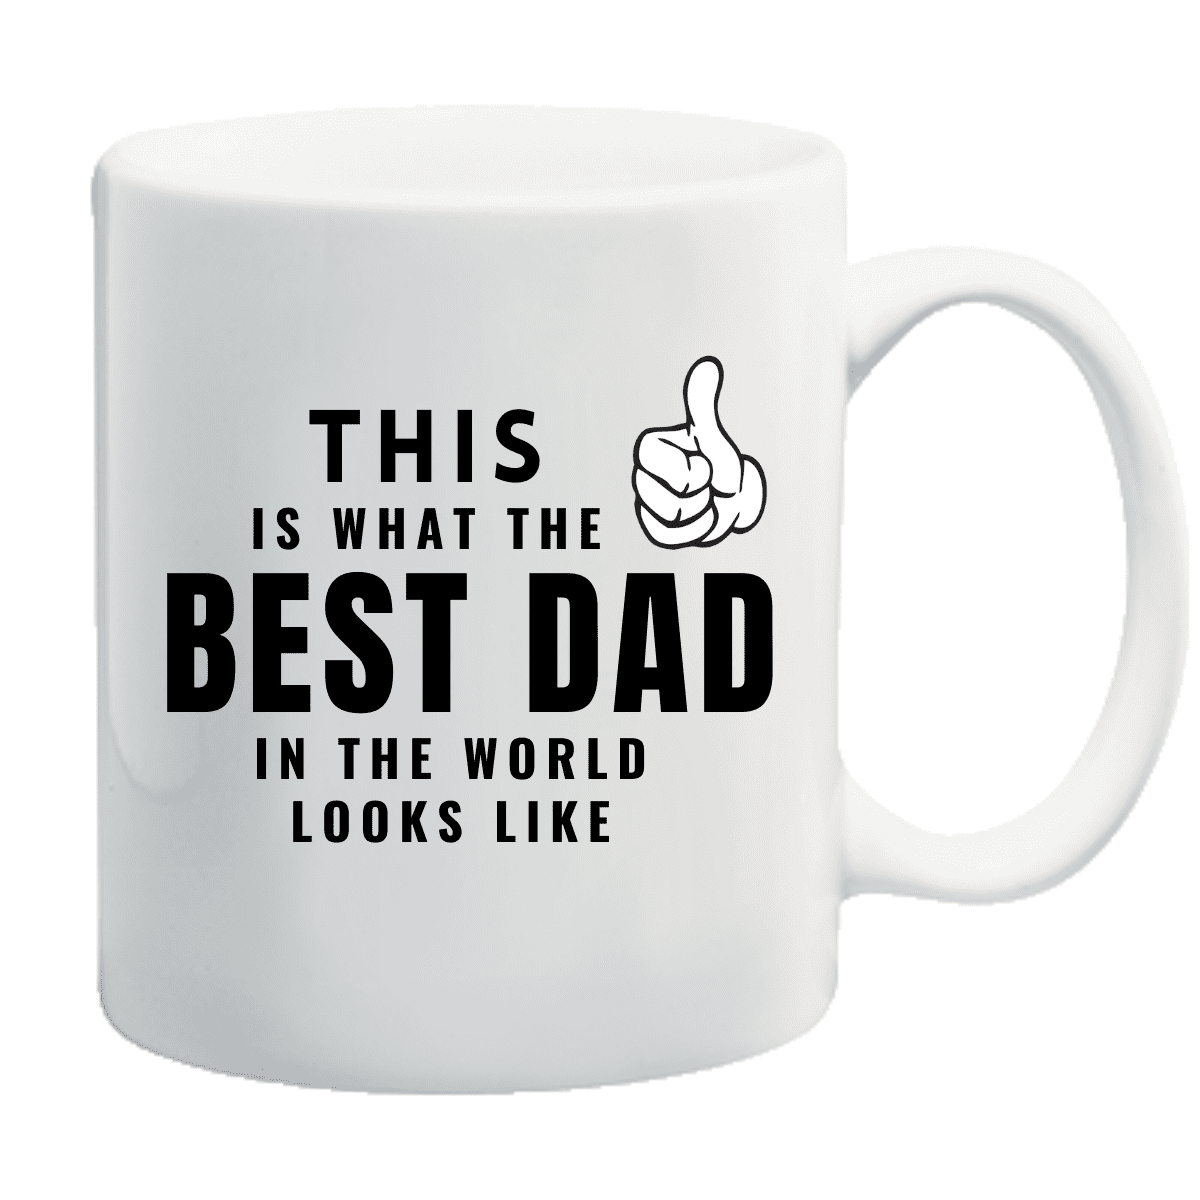 This-is-what-the-Best-DAD-Looks-like_Mug